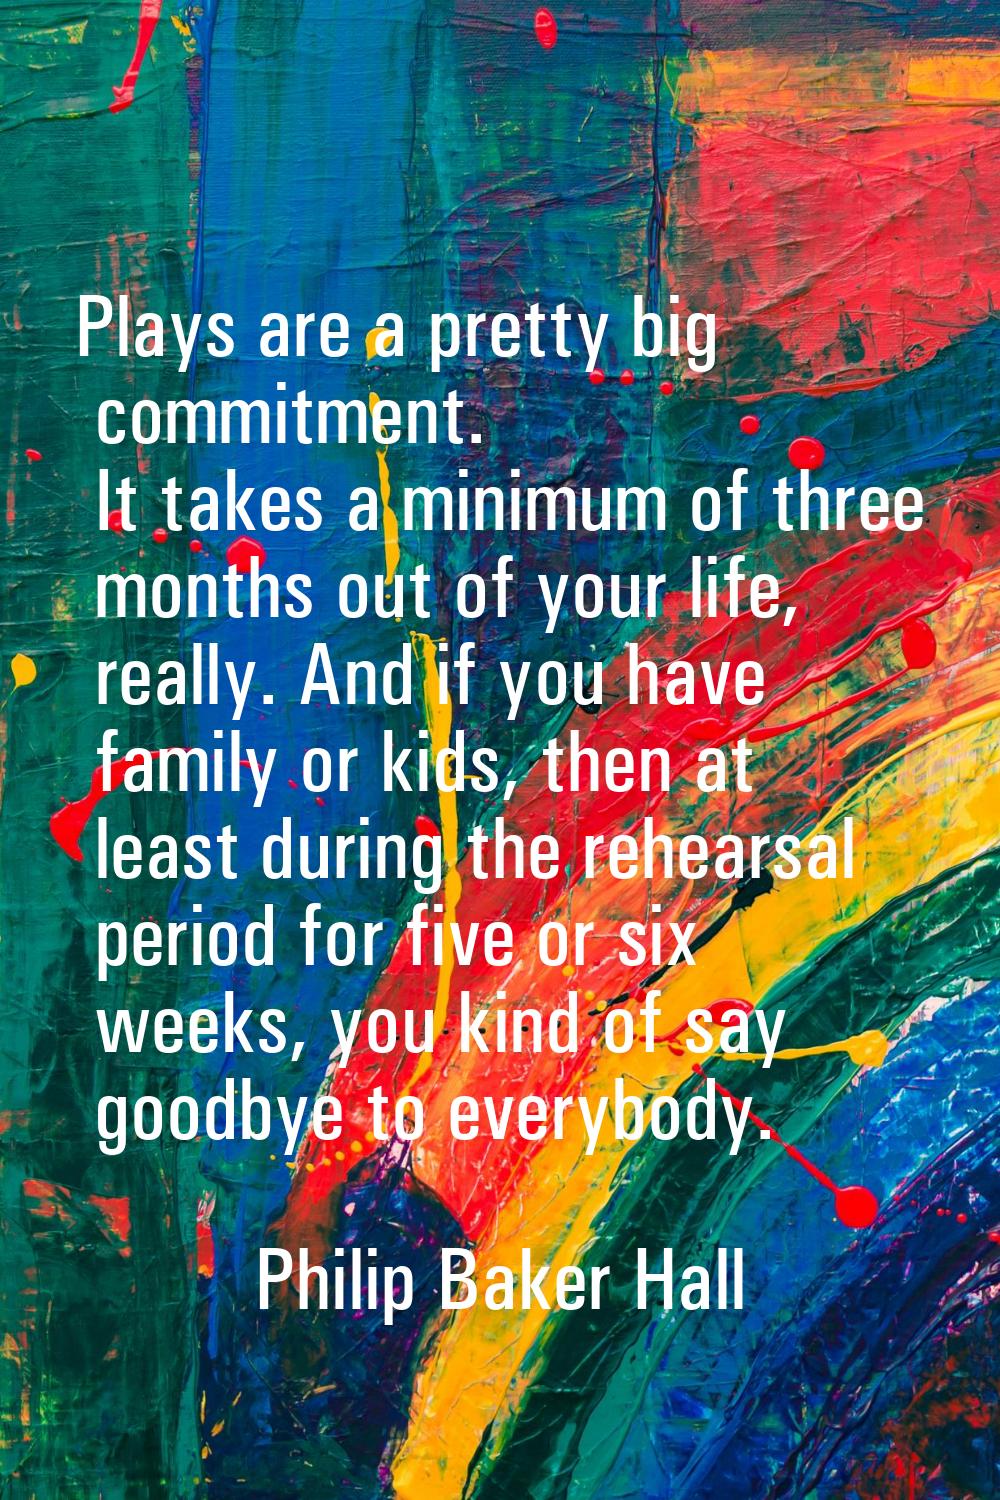 Plays are a pretty big commitment. It takes a minimum of three months out of your life, really. And